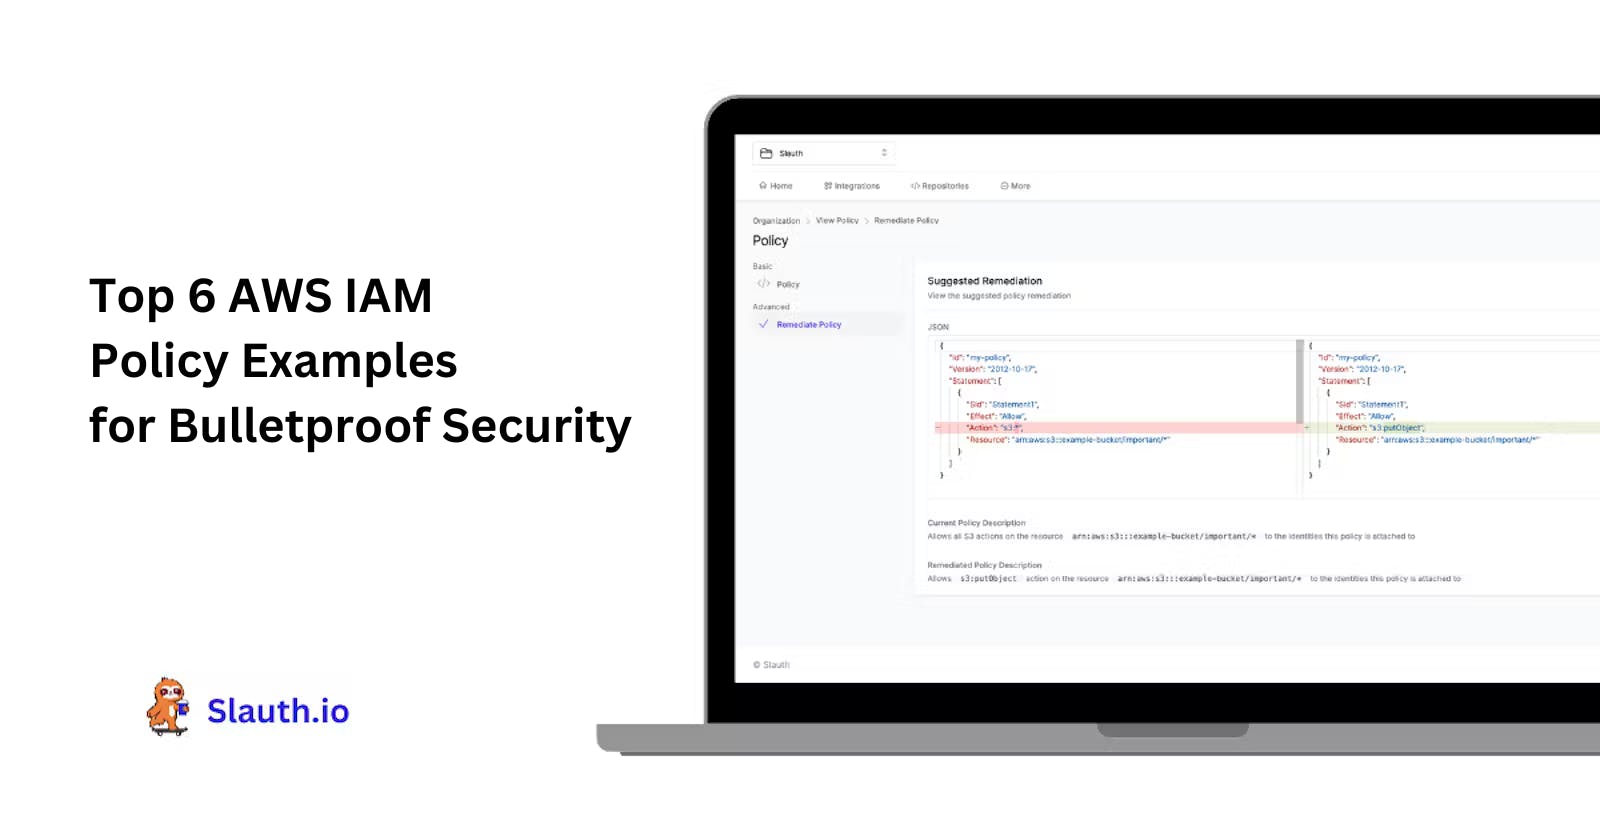 Top 6 AWS IAM Policy Examples for Bulletproof Security